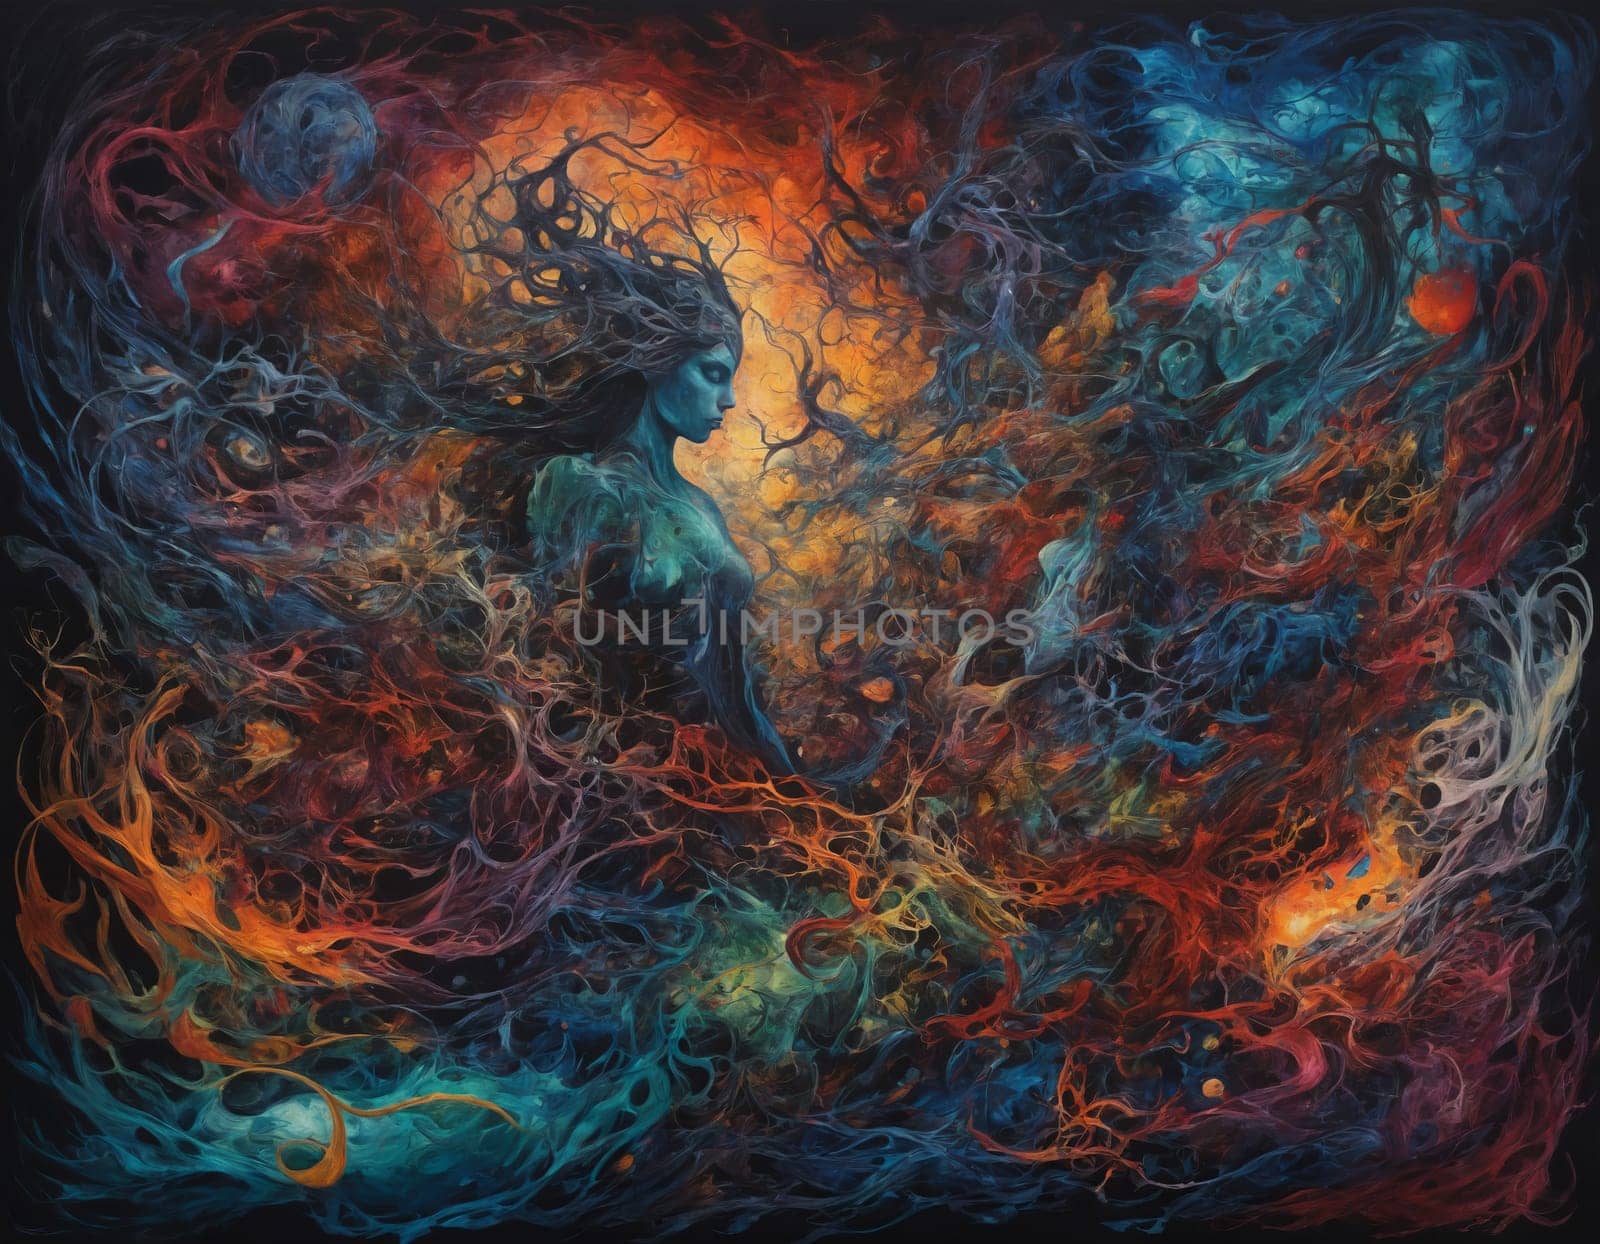 Ethereal Beauty Amidst Cosmic Chaos by Andre1ns